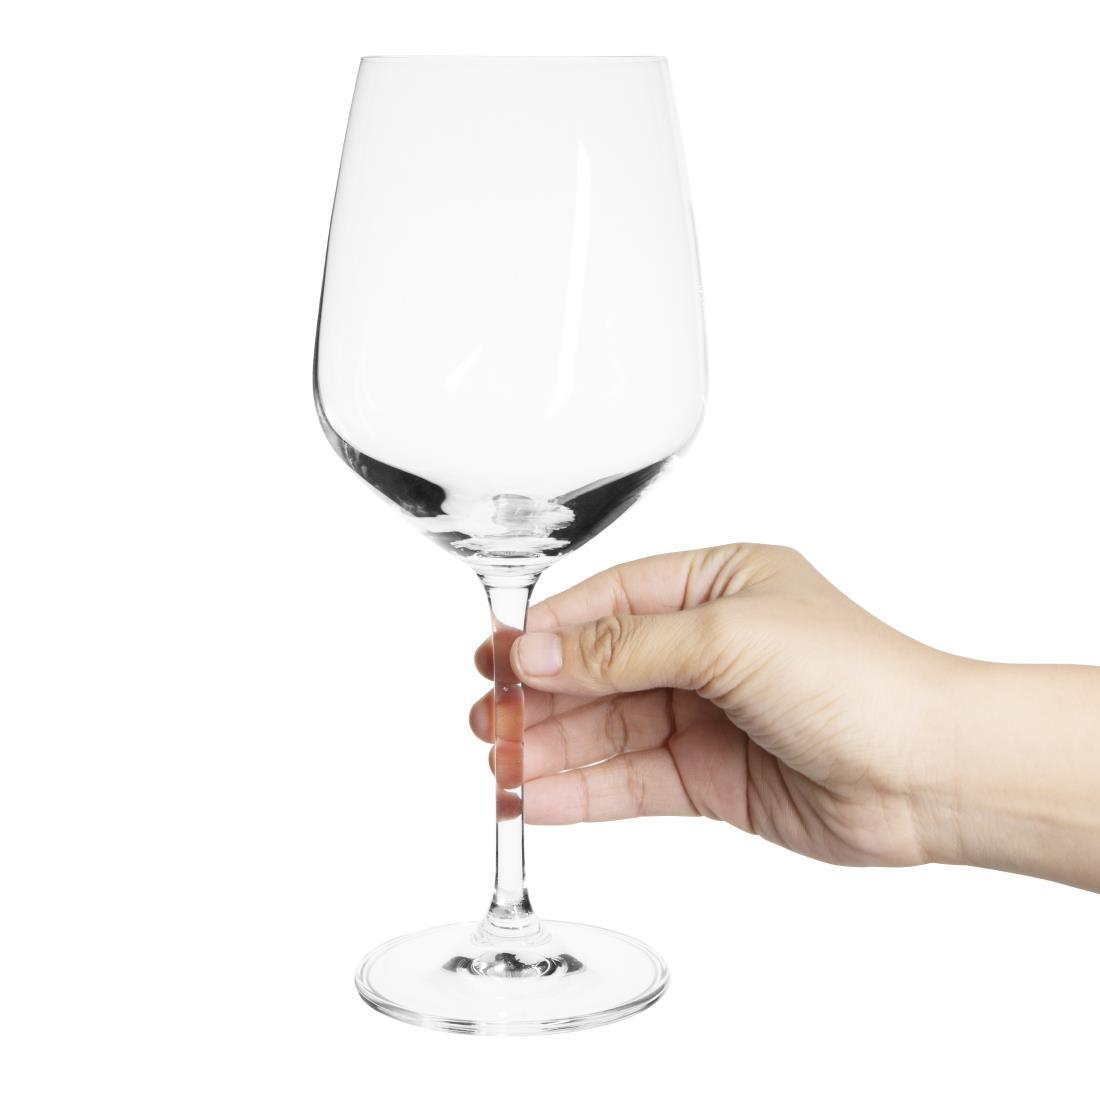 Olympia Chime Crystal Wine Glasses 620ml (Pack of 6) - GF735  - 2